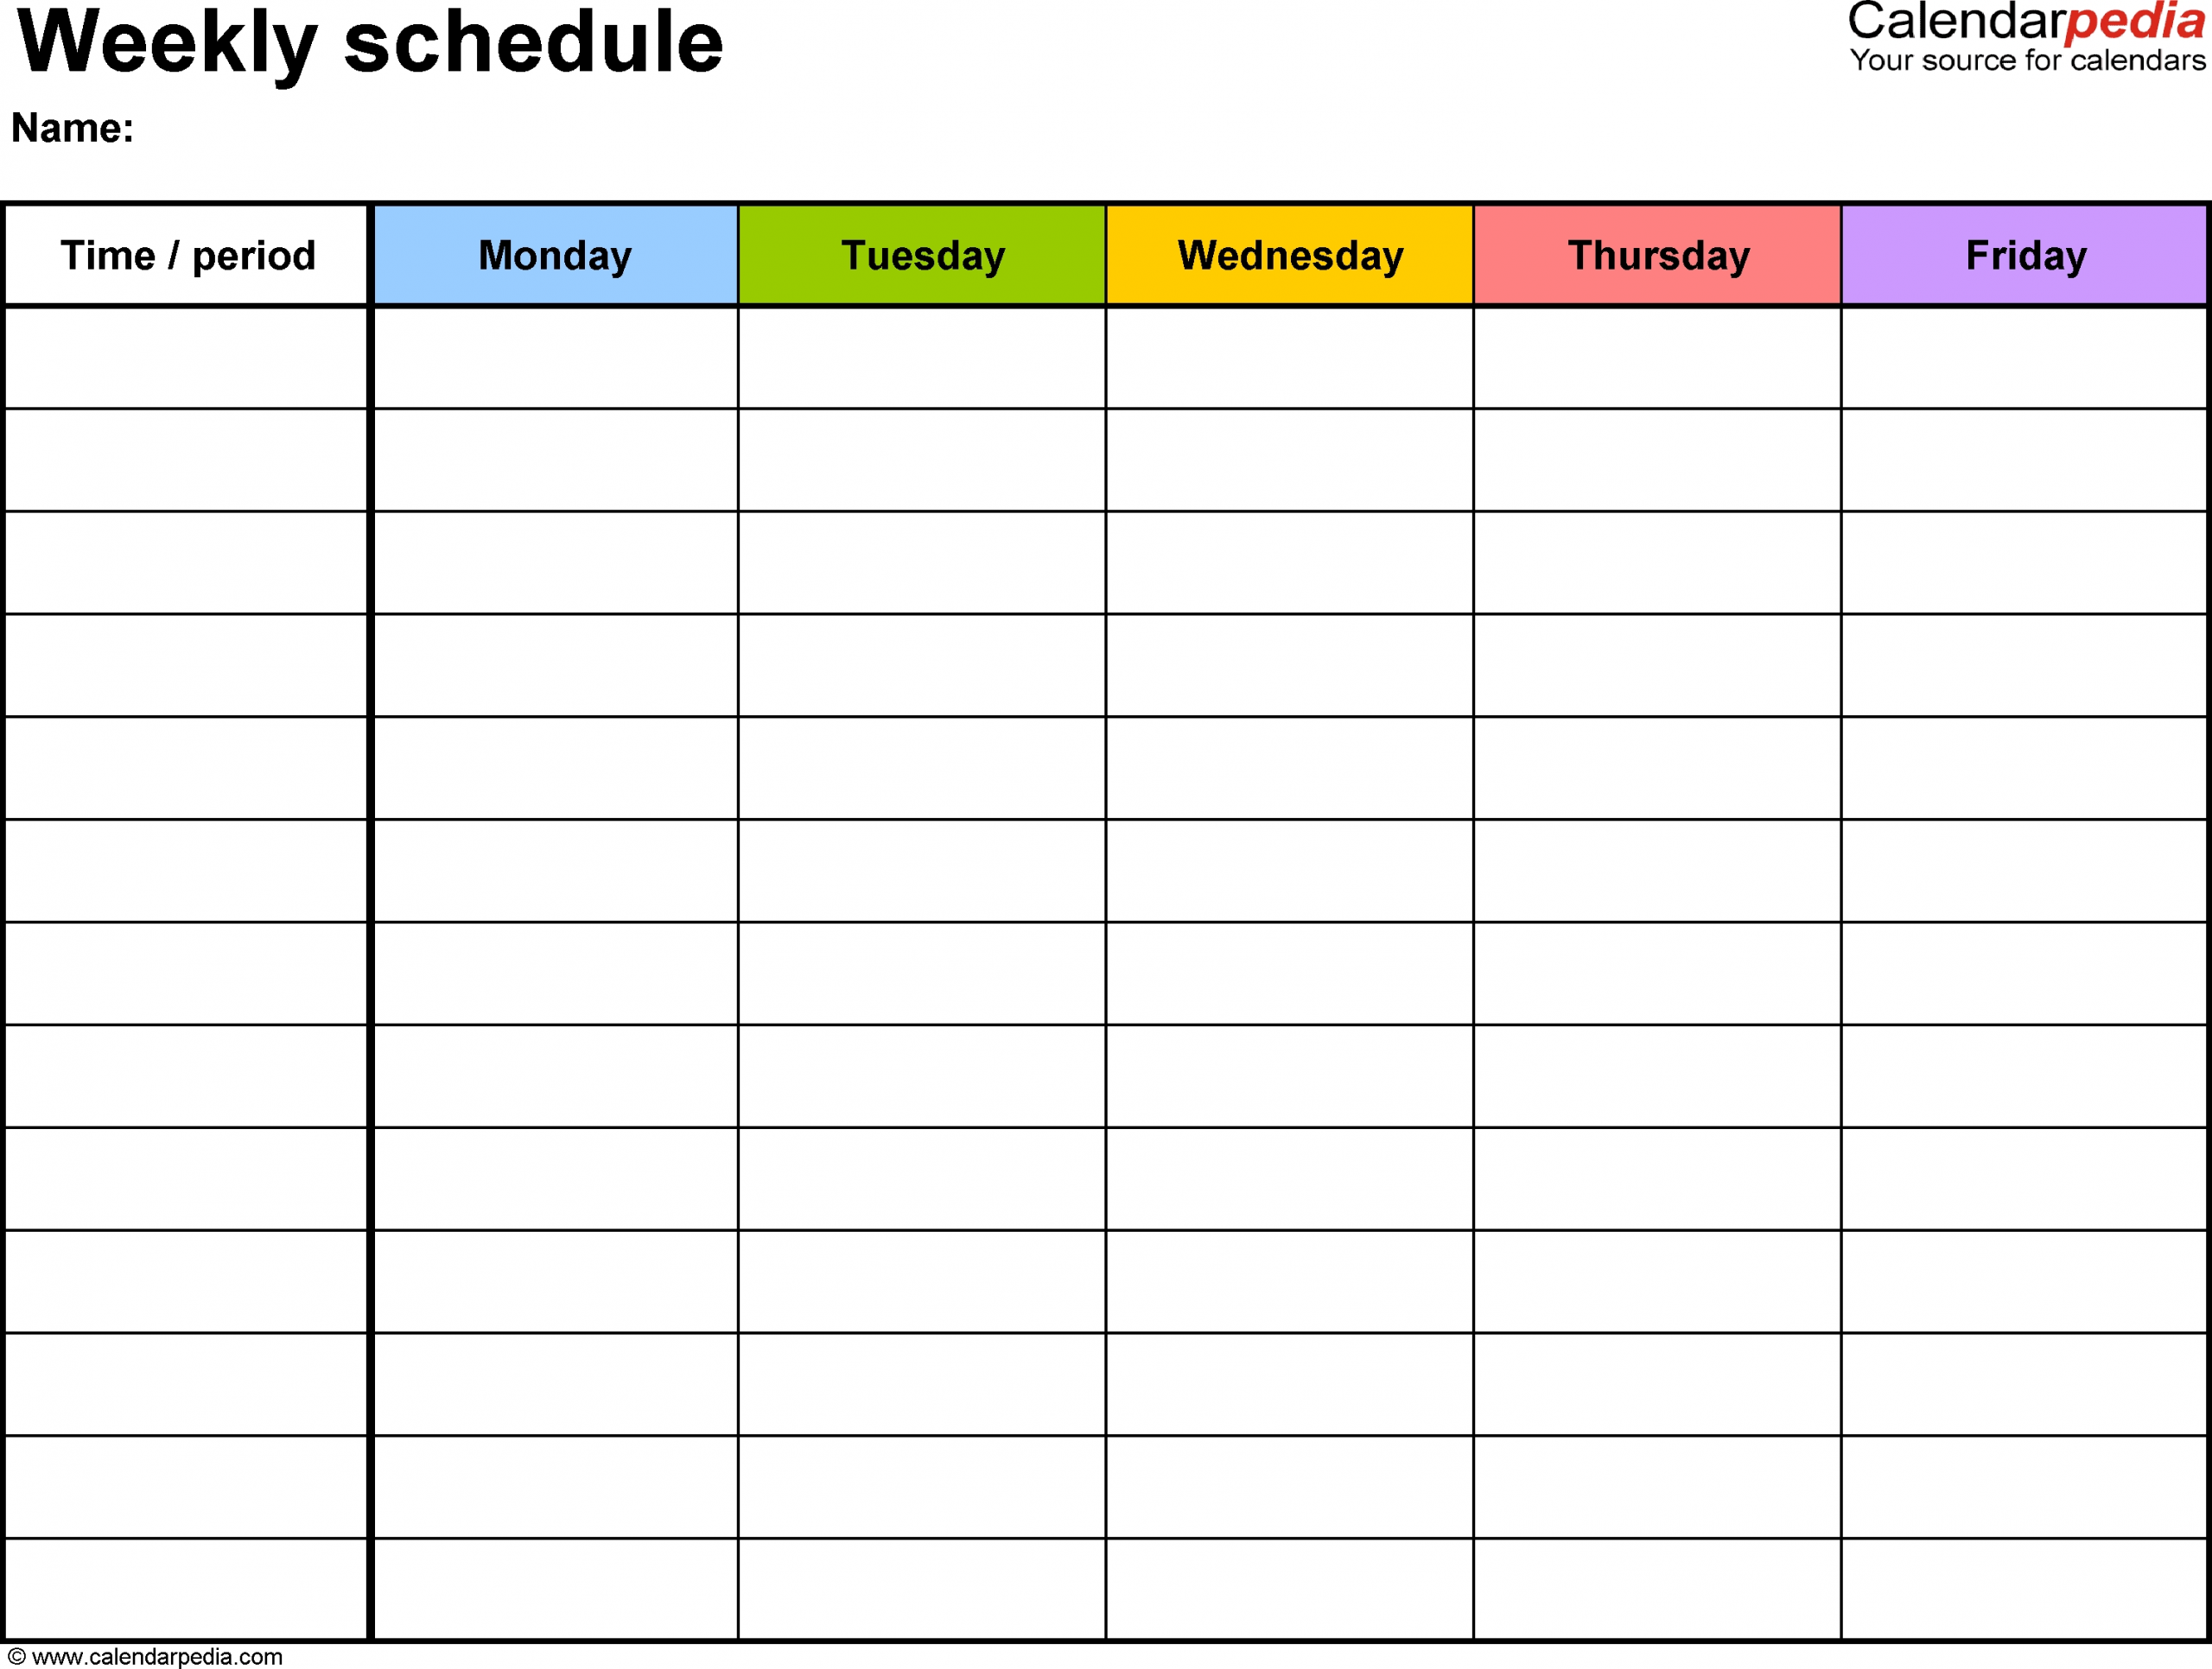 Free Weekly Schedule Templates For Word - 18 Templates inside Weekly Schedule Monday Through Friday